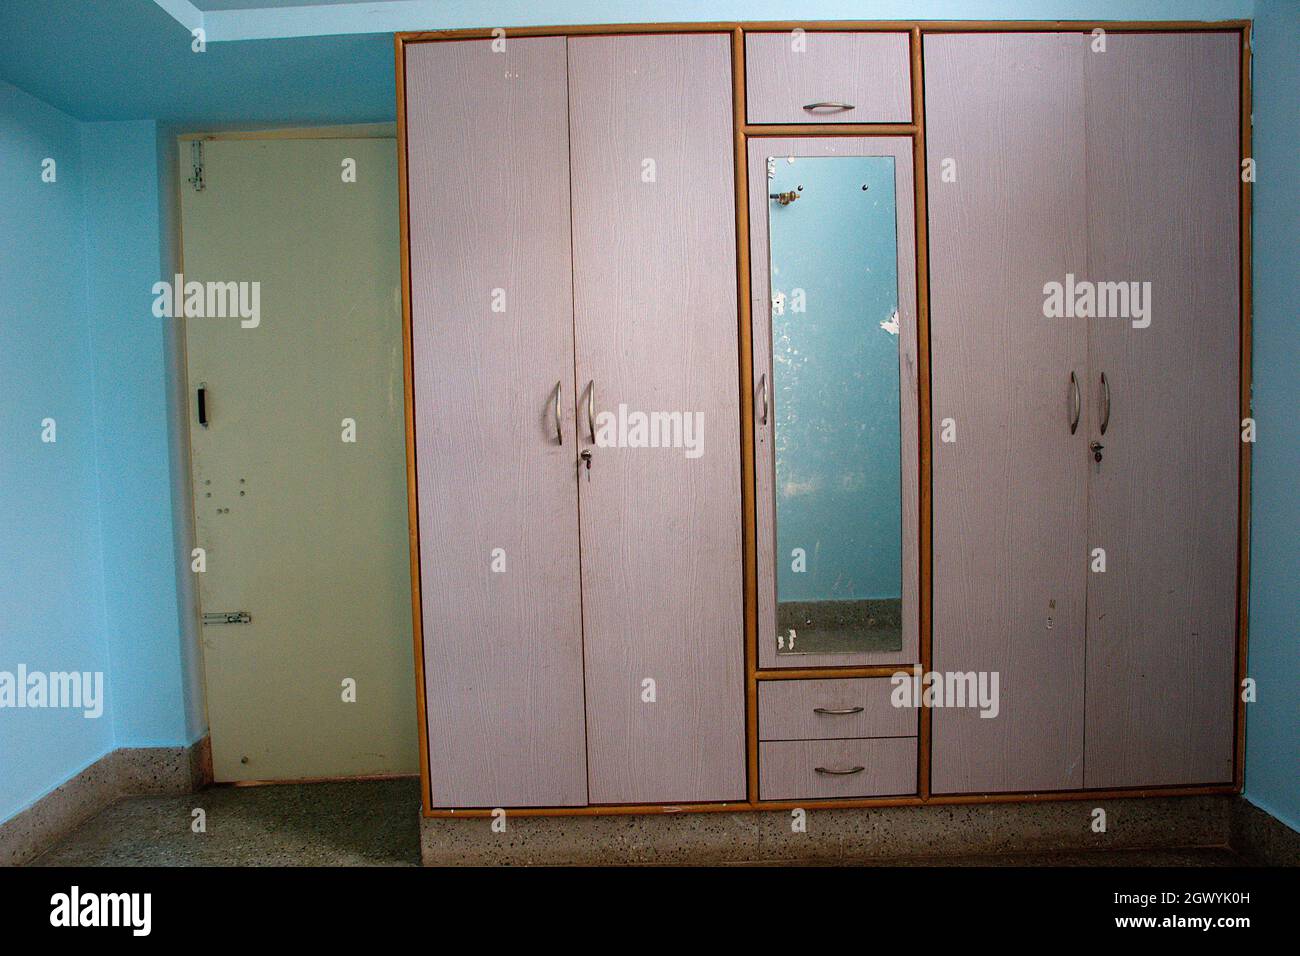 Interior of room showing closed door and wardrobe with dressing mirror Stock Photo